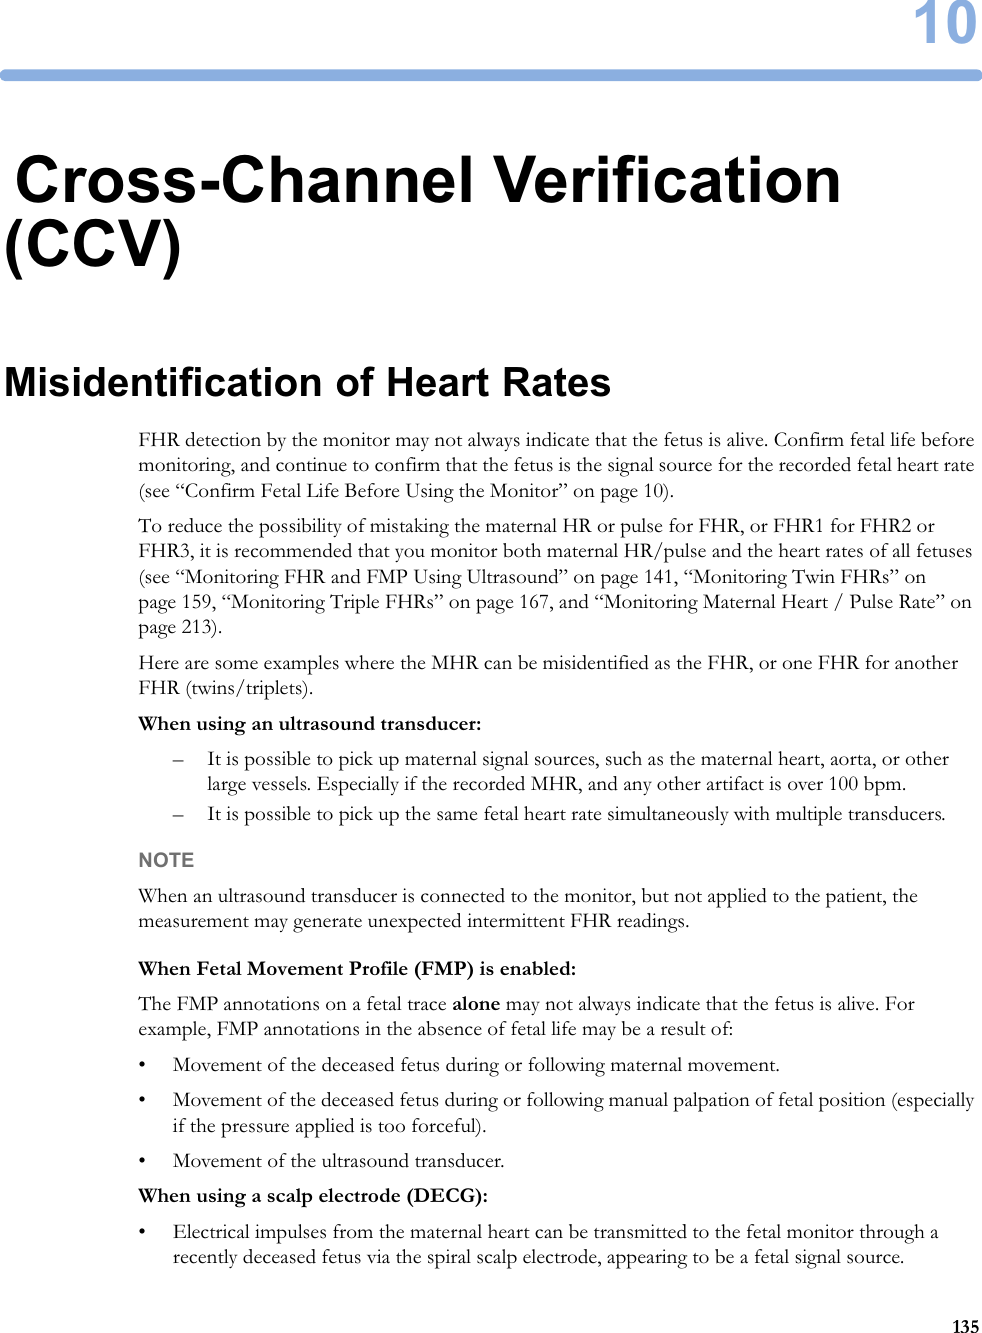 1013510Cross-Channel Verification (CCV)Misidentification of Heart RatesFHR detection by the monitor may not always indicate that the fetus is alive. Confirm fetal life before monitoring, and continue to confirm that the fetus is the signal source for the recorded fetal heart rate (see “Confirm Fetal Life Before Using the Monitor” on page 10).To reduce the possibility of mistaking the maternal HR or pulse for FHR, or FHR1 for FHR2 or FHR3, it is recommended that you monitor both maternal HR/pulse and the heart rates of all fetuses (see “Monitoring FHR and FMP Using Ultrasound” on page 141, “Monitoring Twin FHRs” on page 159, “Monitoring Triple FHRs” on page 167, and “Monitoring Maternal Heart / Pulse Rate” on page 213).Here are some examples where the MHR can be misidentified as the FHR, or one FHR for another FHR (twins/triplets).When using an ultrasound transducer:– It is possible to pick up maternal signal sources, such as the maternal heart, aorta, or other large vessels. Especially if the recorded MHR, and any other artifact is over 100 bpm.– It is possible to pick up the same fetal heart rate simultaneously with multiple transducers.NOTEWhen an ultrasound transducer is connected to the monitor, but not applied to the patient, the measurement may generate unexpected intermittent FHR readings.When Fetal Movement Profile (FMP) is enabled:The FMP annotations on a fetal trace alone may not always indicate that the fetus is alive. For example, FMP annotations in the absence of fetal life may be a result of:• Movement of the deceased fetus during or following maternal movement.• Movement of the deceased fetus during or following manual palpation of fetal position (especially if the pressure applied is too forceful).• Movement of the ultrasound transducer.When using a scalp electrode (DECG):• Electrical impulses from the maternal heart can be transmitted to the fetal monitor through a recently deceased fetus via the spiral scalp electrode, appearing to be a fetal signal source.